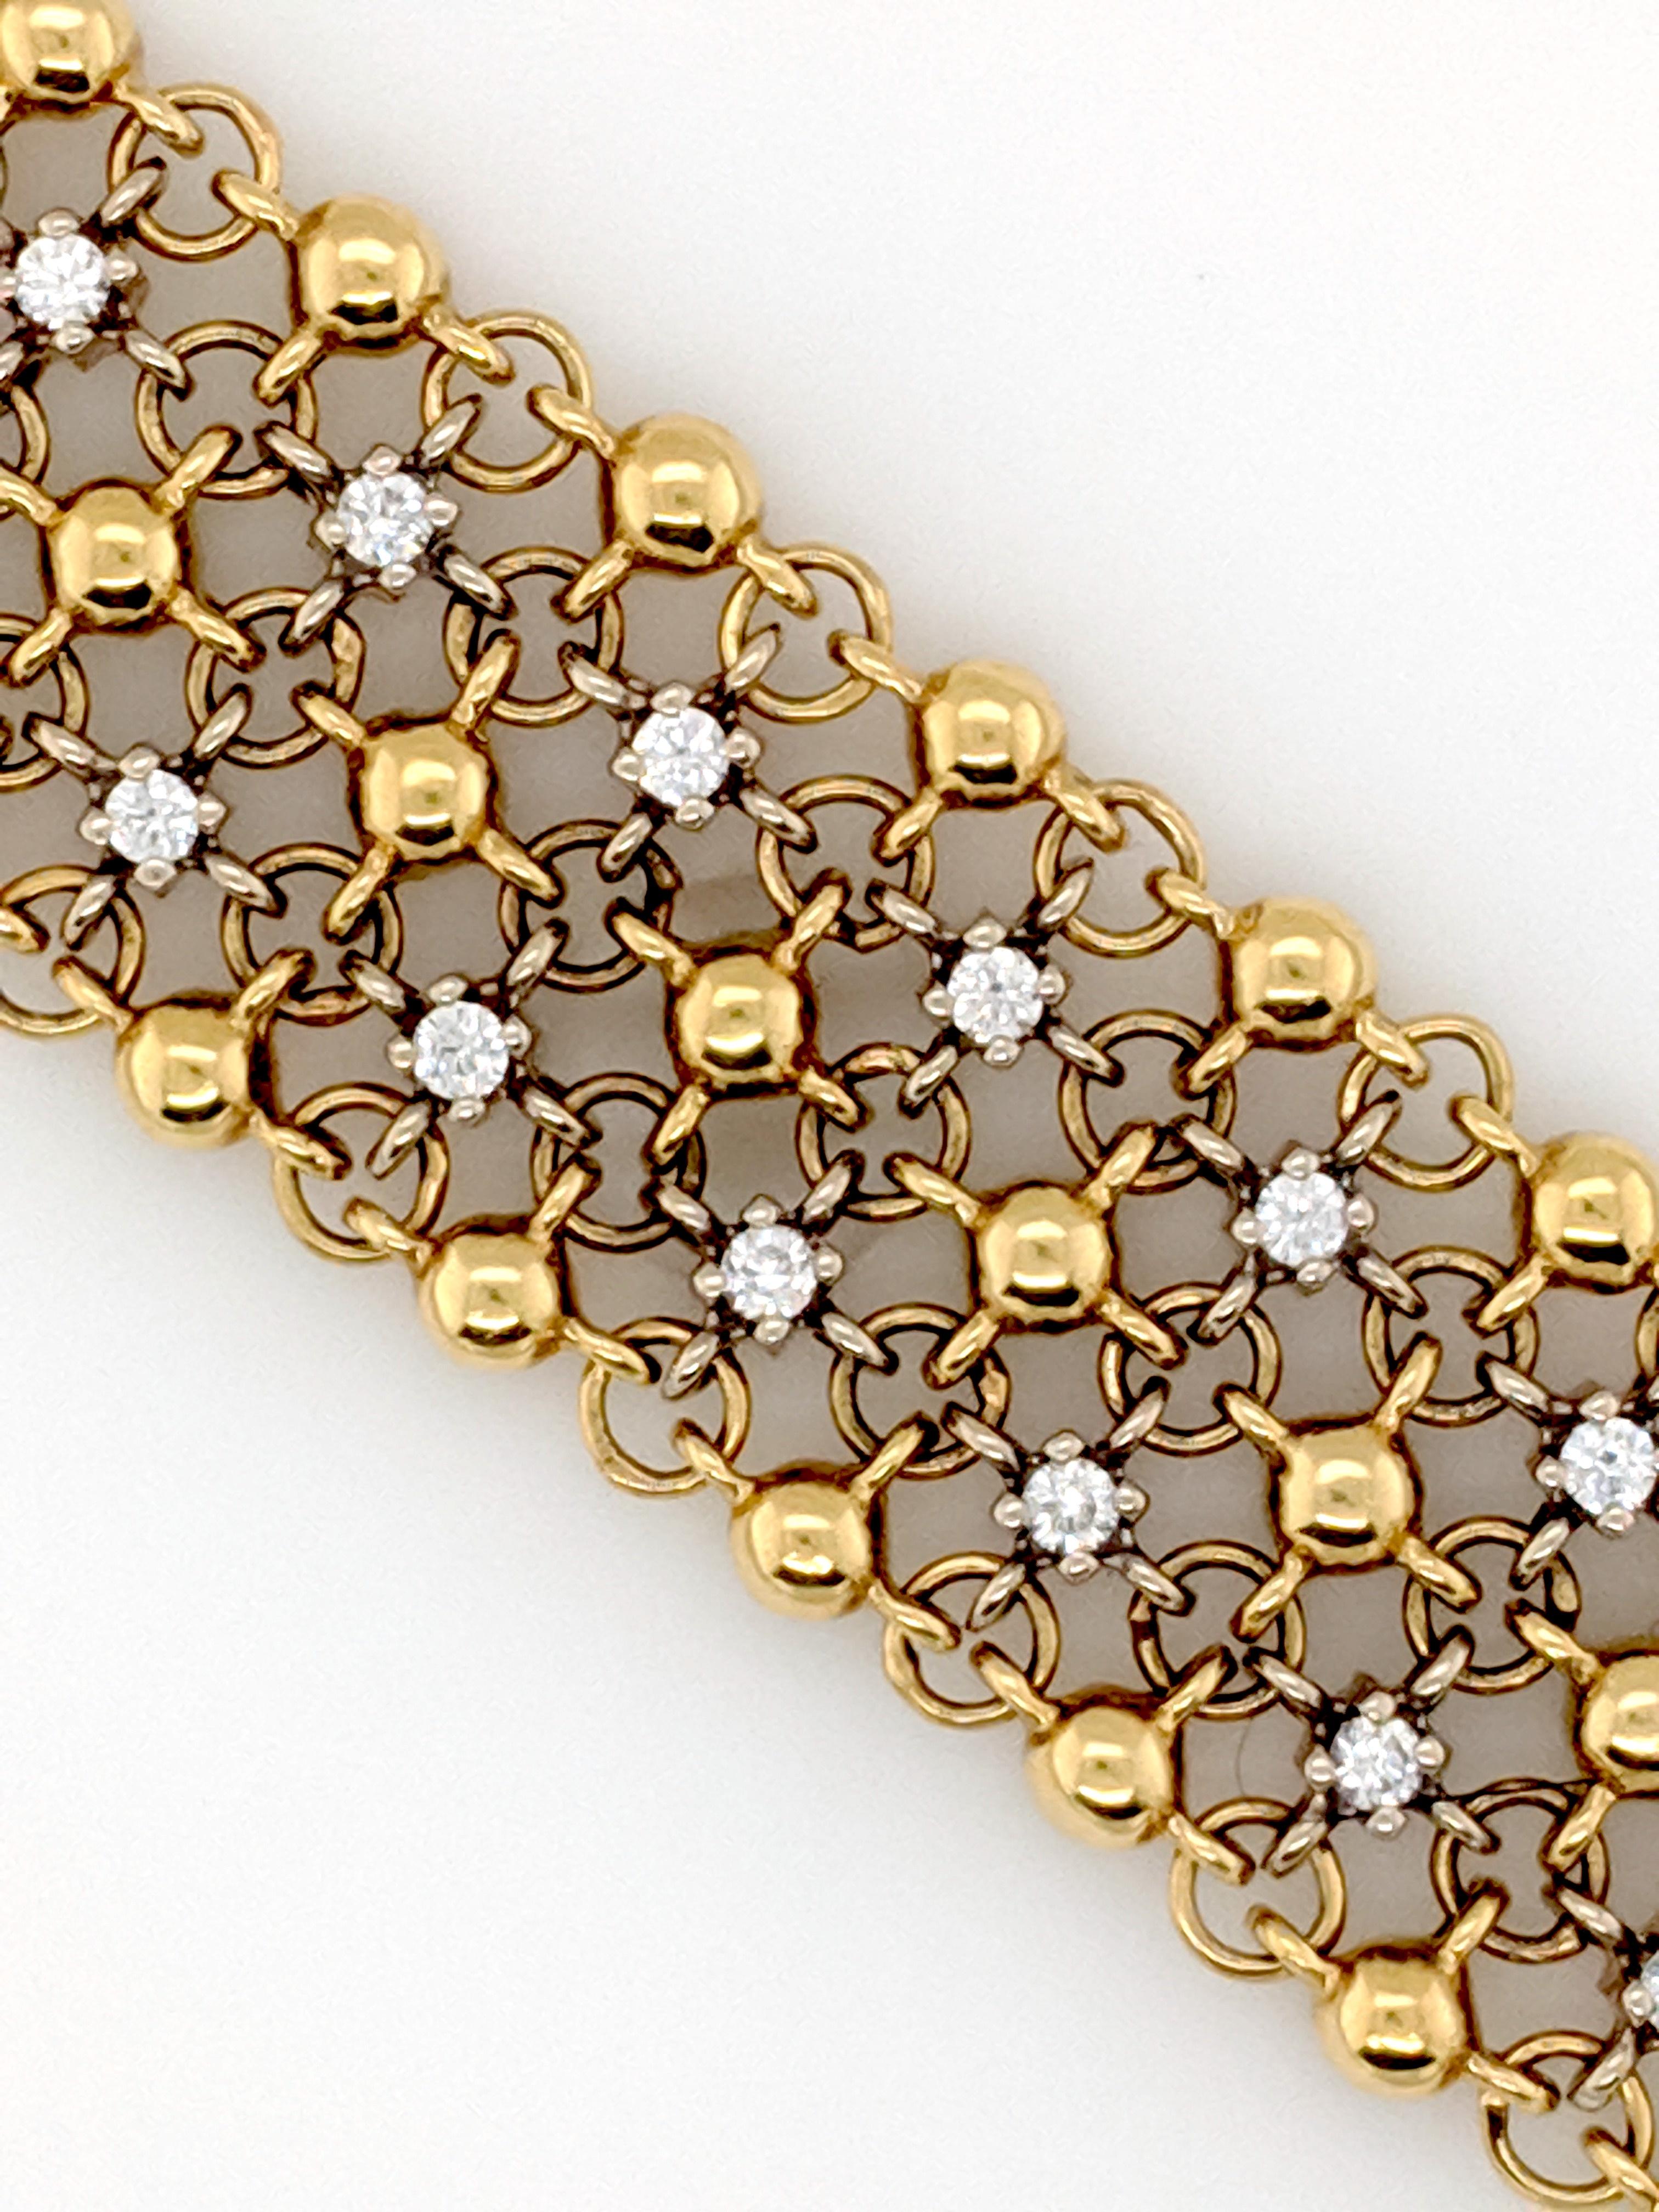 This Diamond bracelet designed by Sal Praschnik has been crafted in 18k yellow gold and 18kwg diamond plate and contains (38) round diamonds weighing approximately 1.90cttw with a color of G/H and a clarity of SI1. The bracelet measures 7